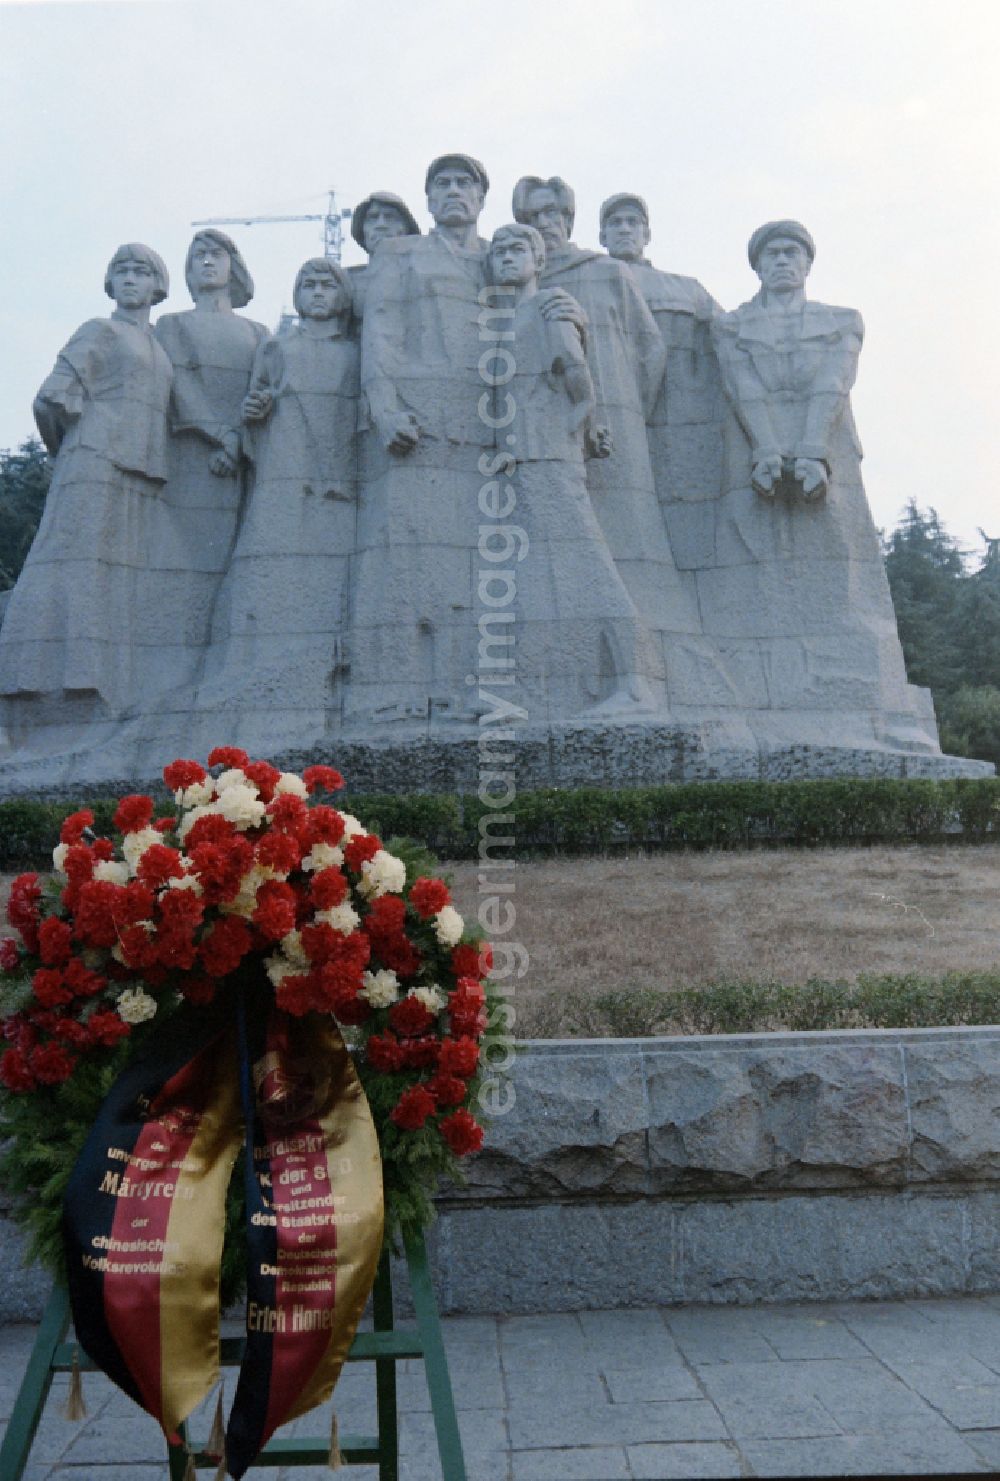 GDR picture archive: Nanjing - Participants of the official government delegation of the GDR under the General Secretary of the SED and Chairman of the State Council of the GDR Erich Honecker at the memorial statues of the Yuhuatai Martyrs in the Memorial Park of the Revolutionary Martyrs of the Chinese People's Revolution in the Yuhuatai district of Nanjing in China